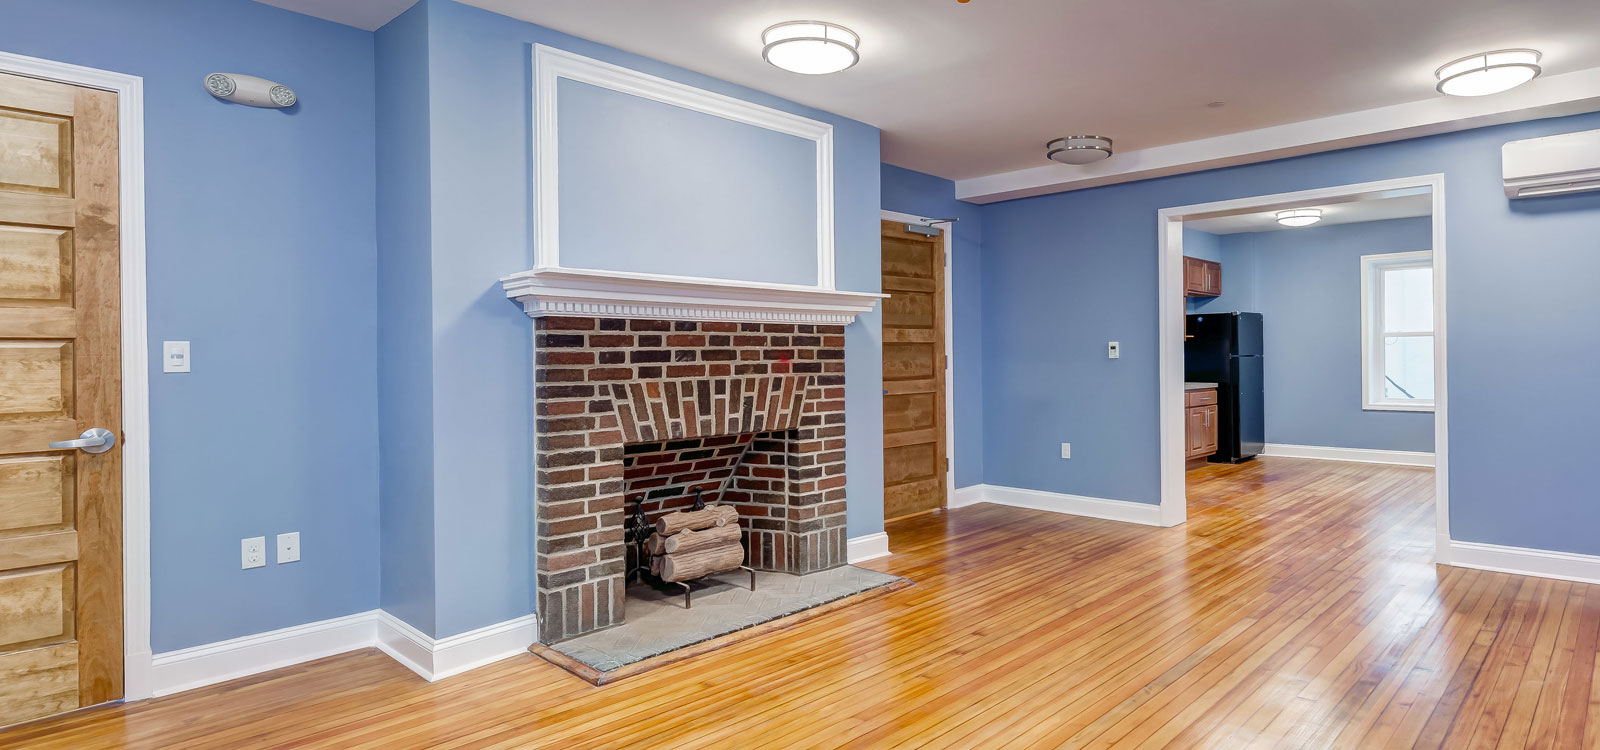 Blessed Sacrament Rectory Renovation, Baltimore, residential renovation by UrbanBuilt